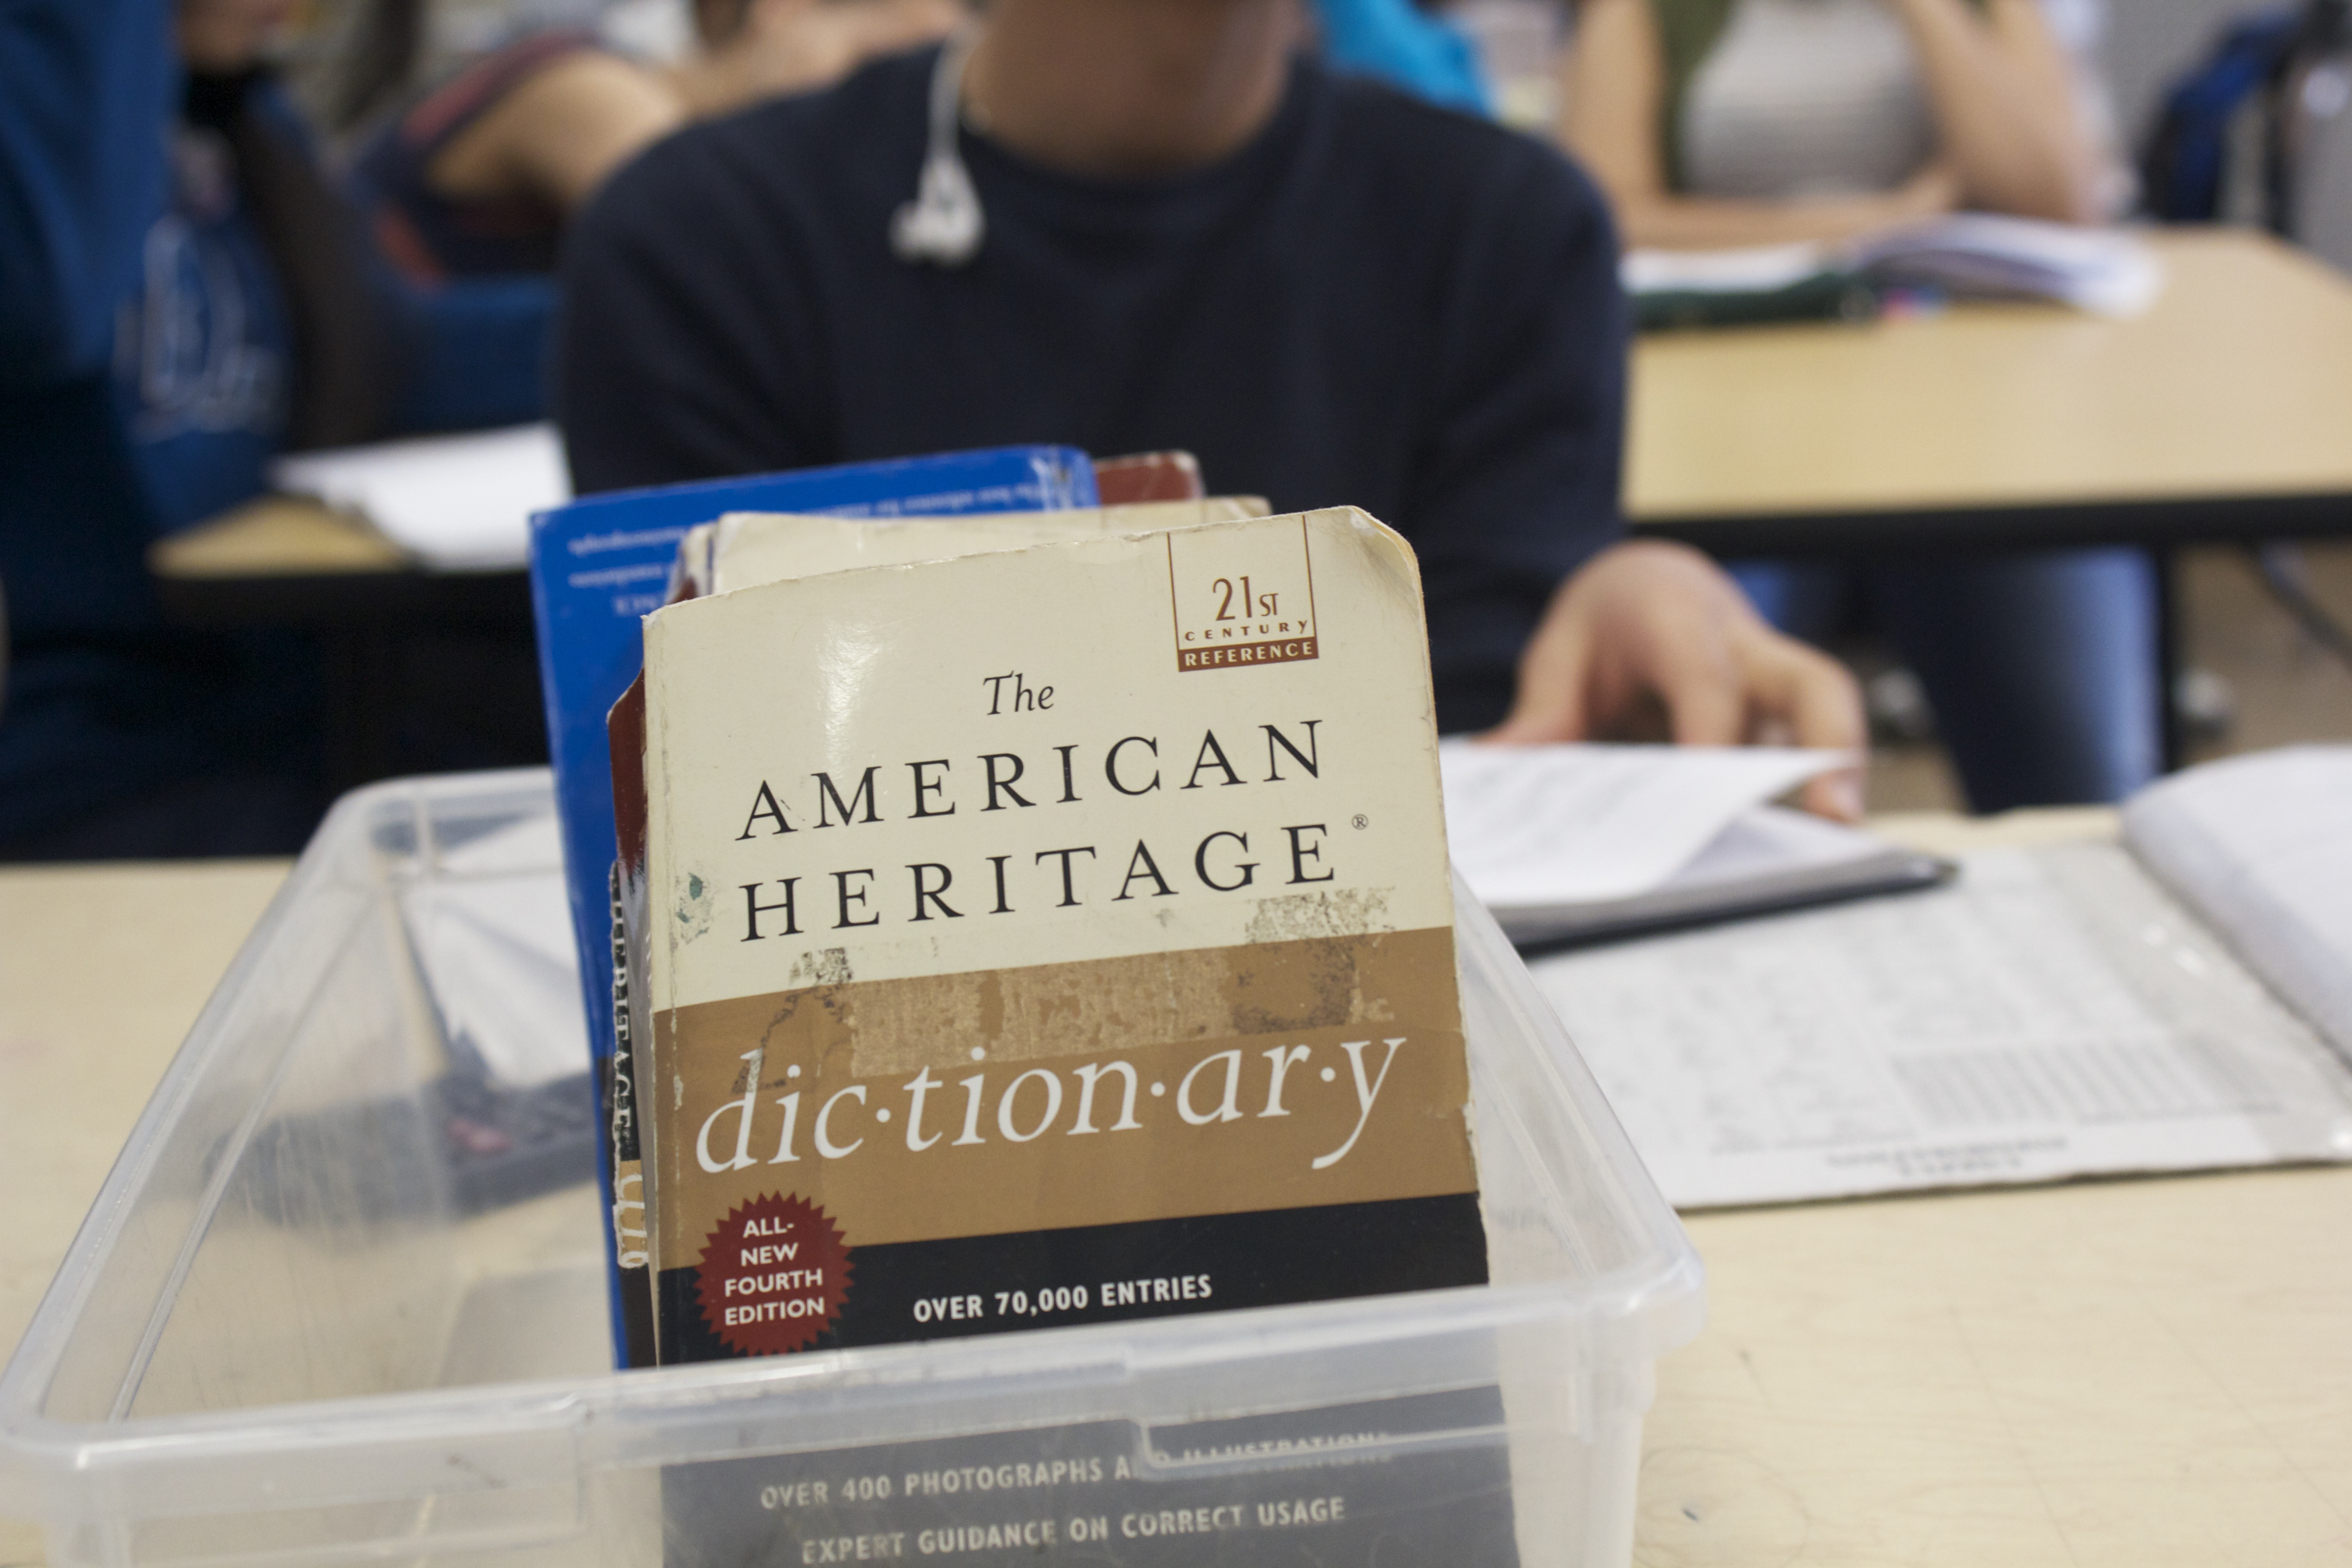 Dictionaries are a common sight in math classrooms at International Community High School in the South Bronx where every student is a new immigrant who has been in the U.S. for four years or less.